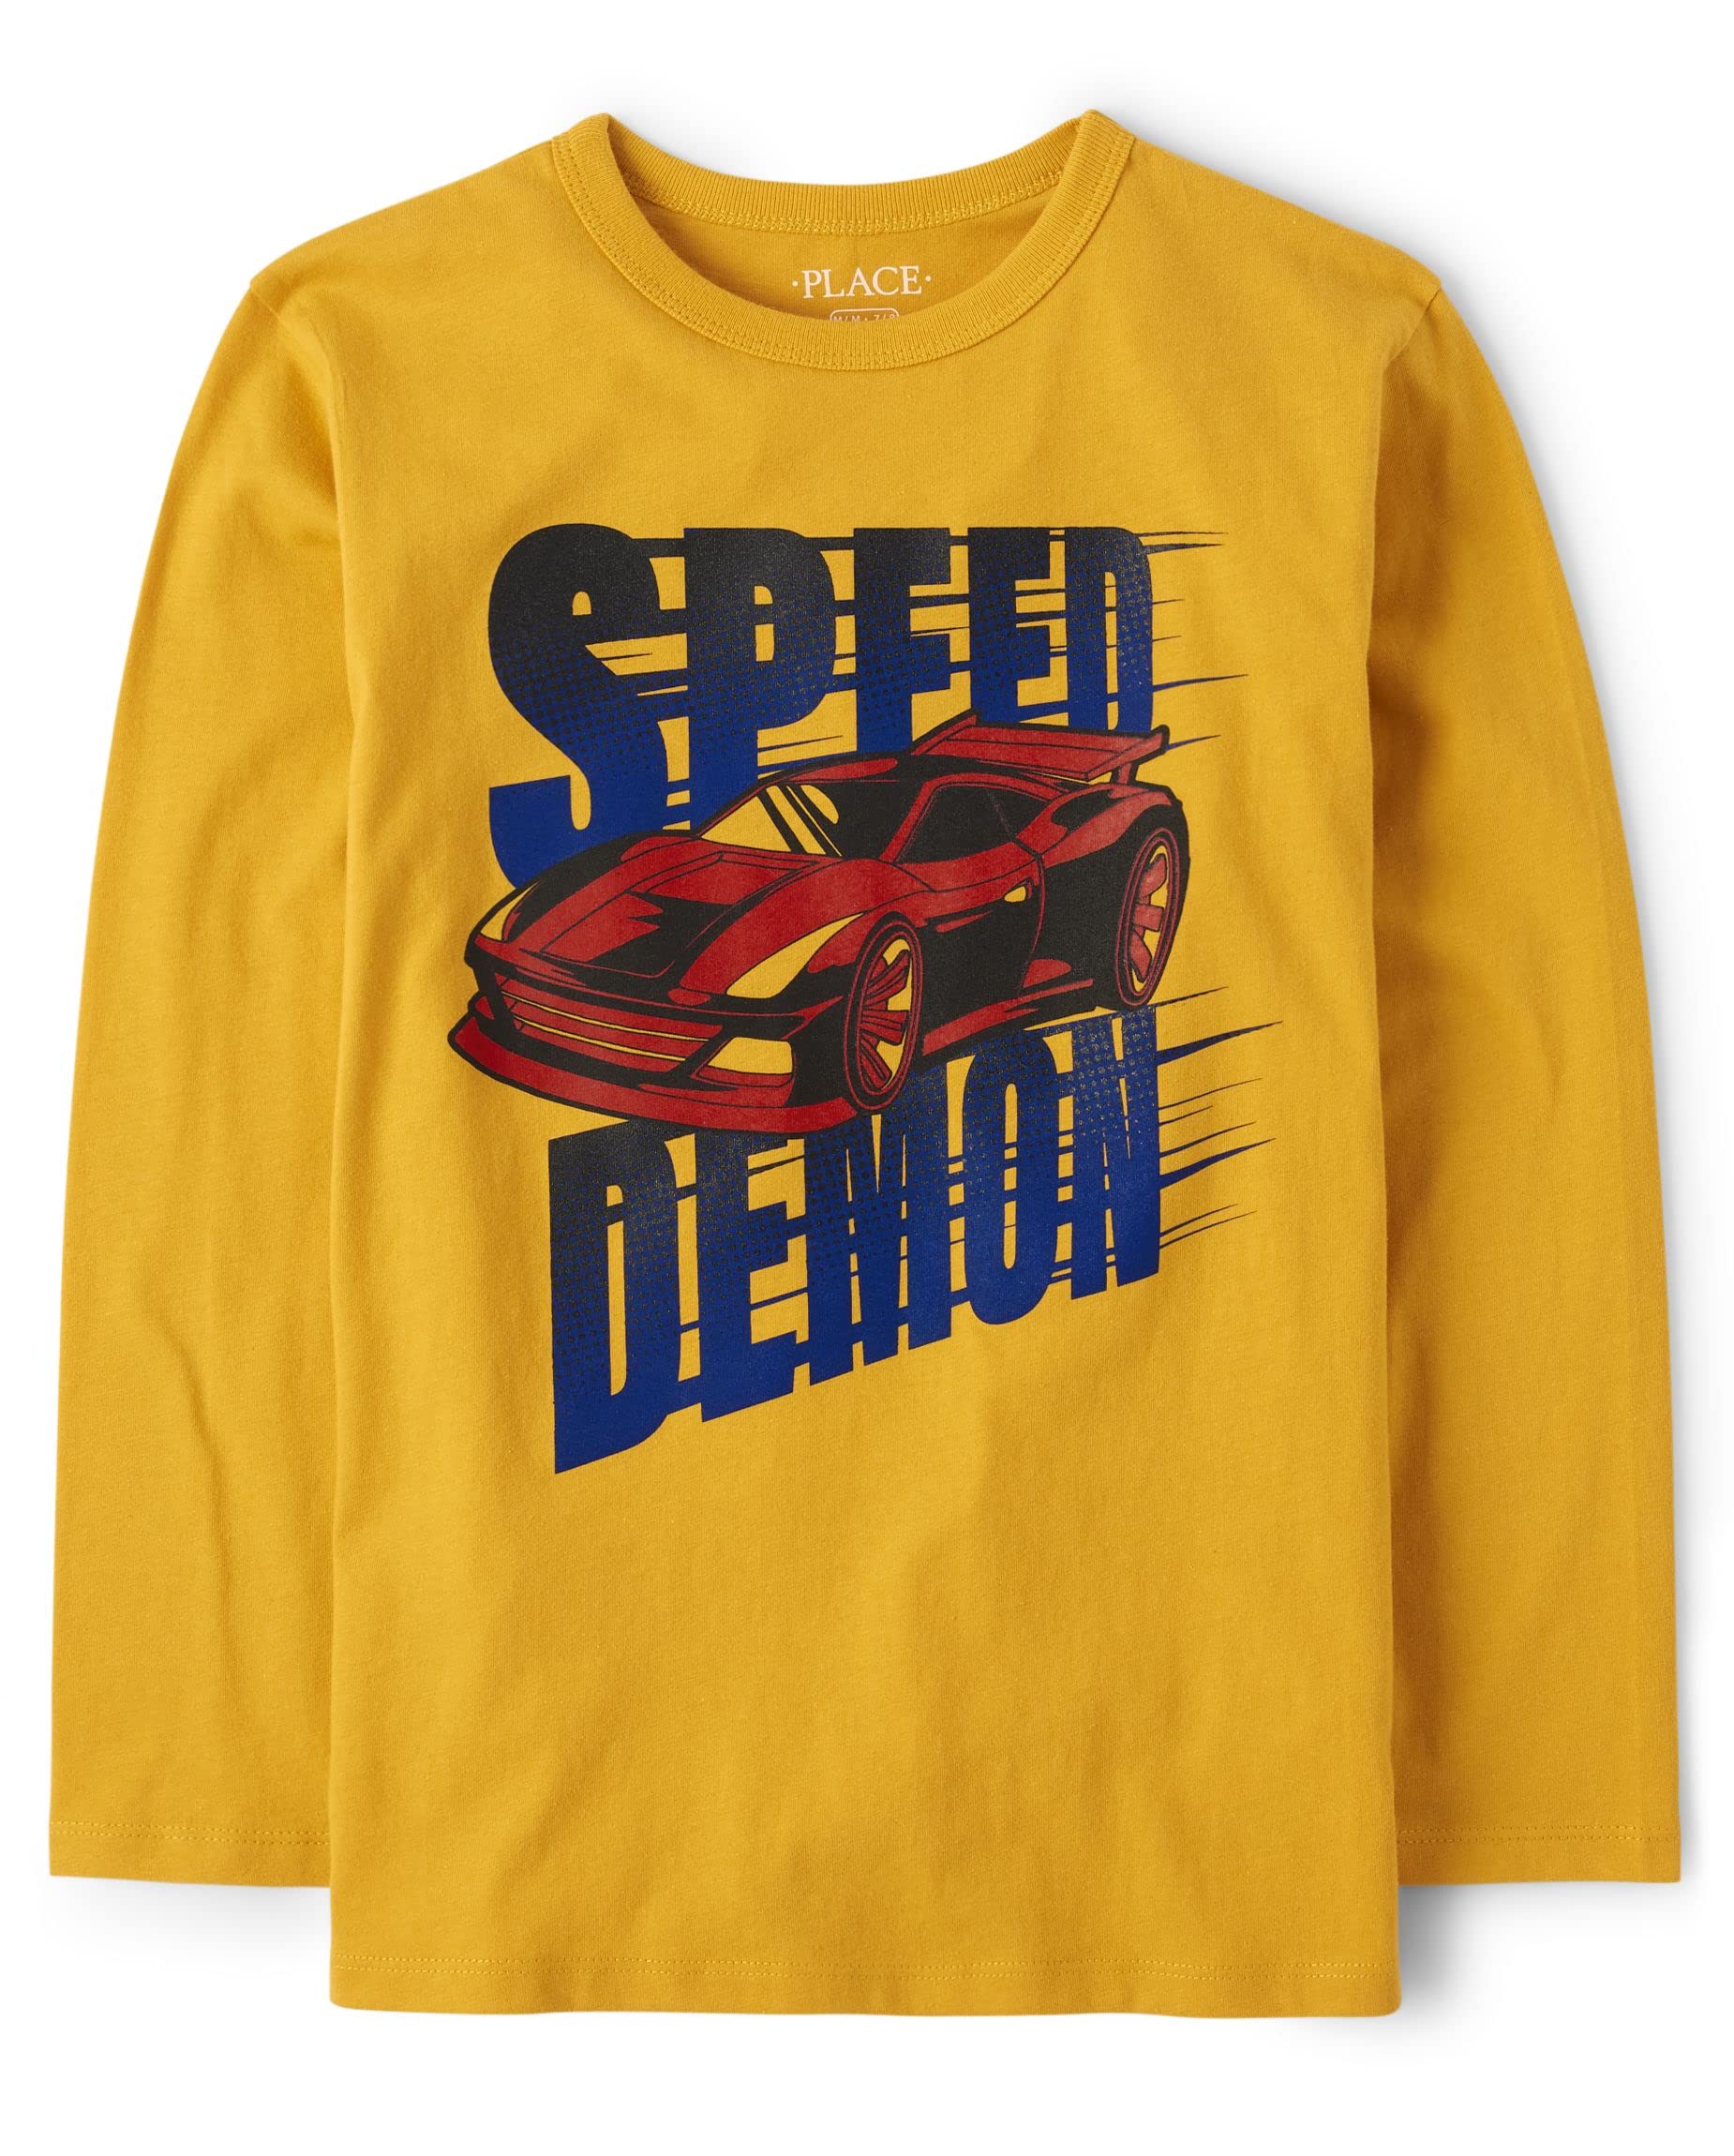 The Children's Place boys Speed Demon Graphic Long Sleeve T Shirt